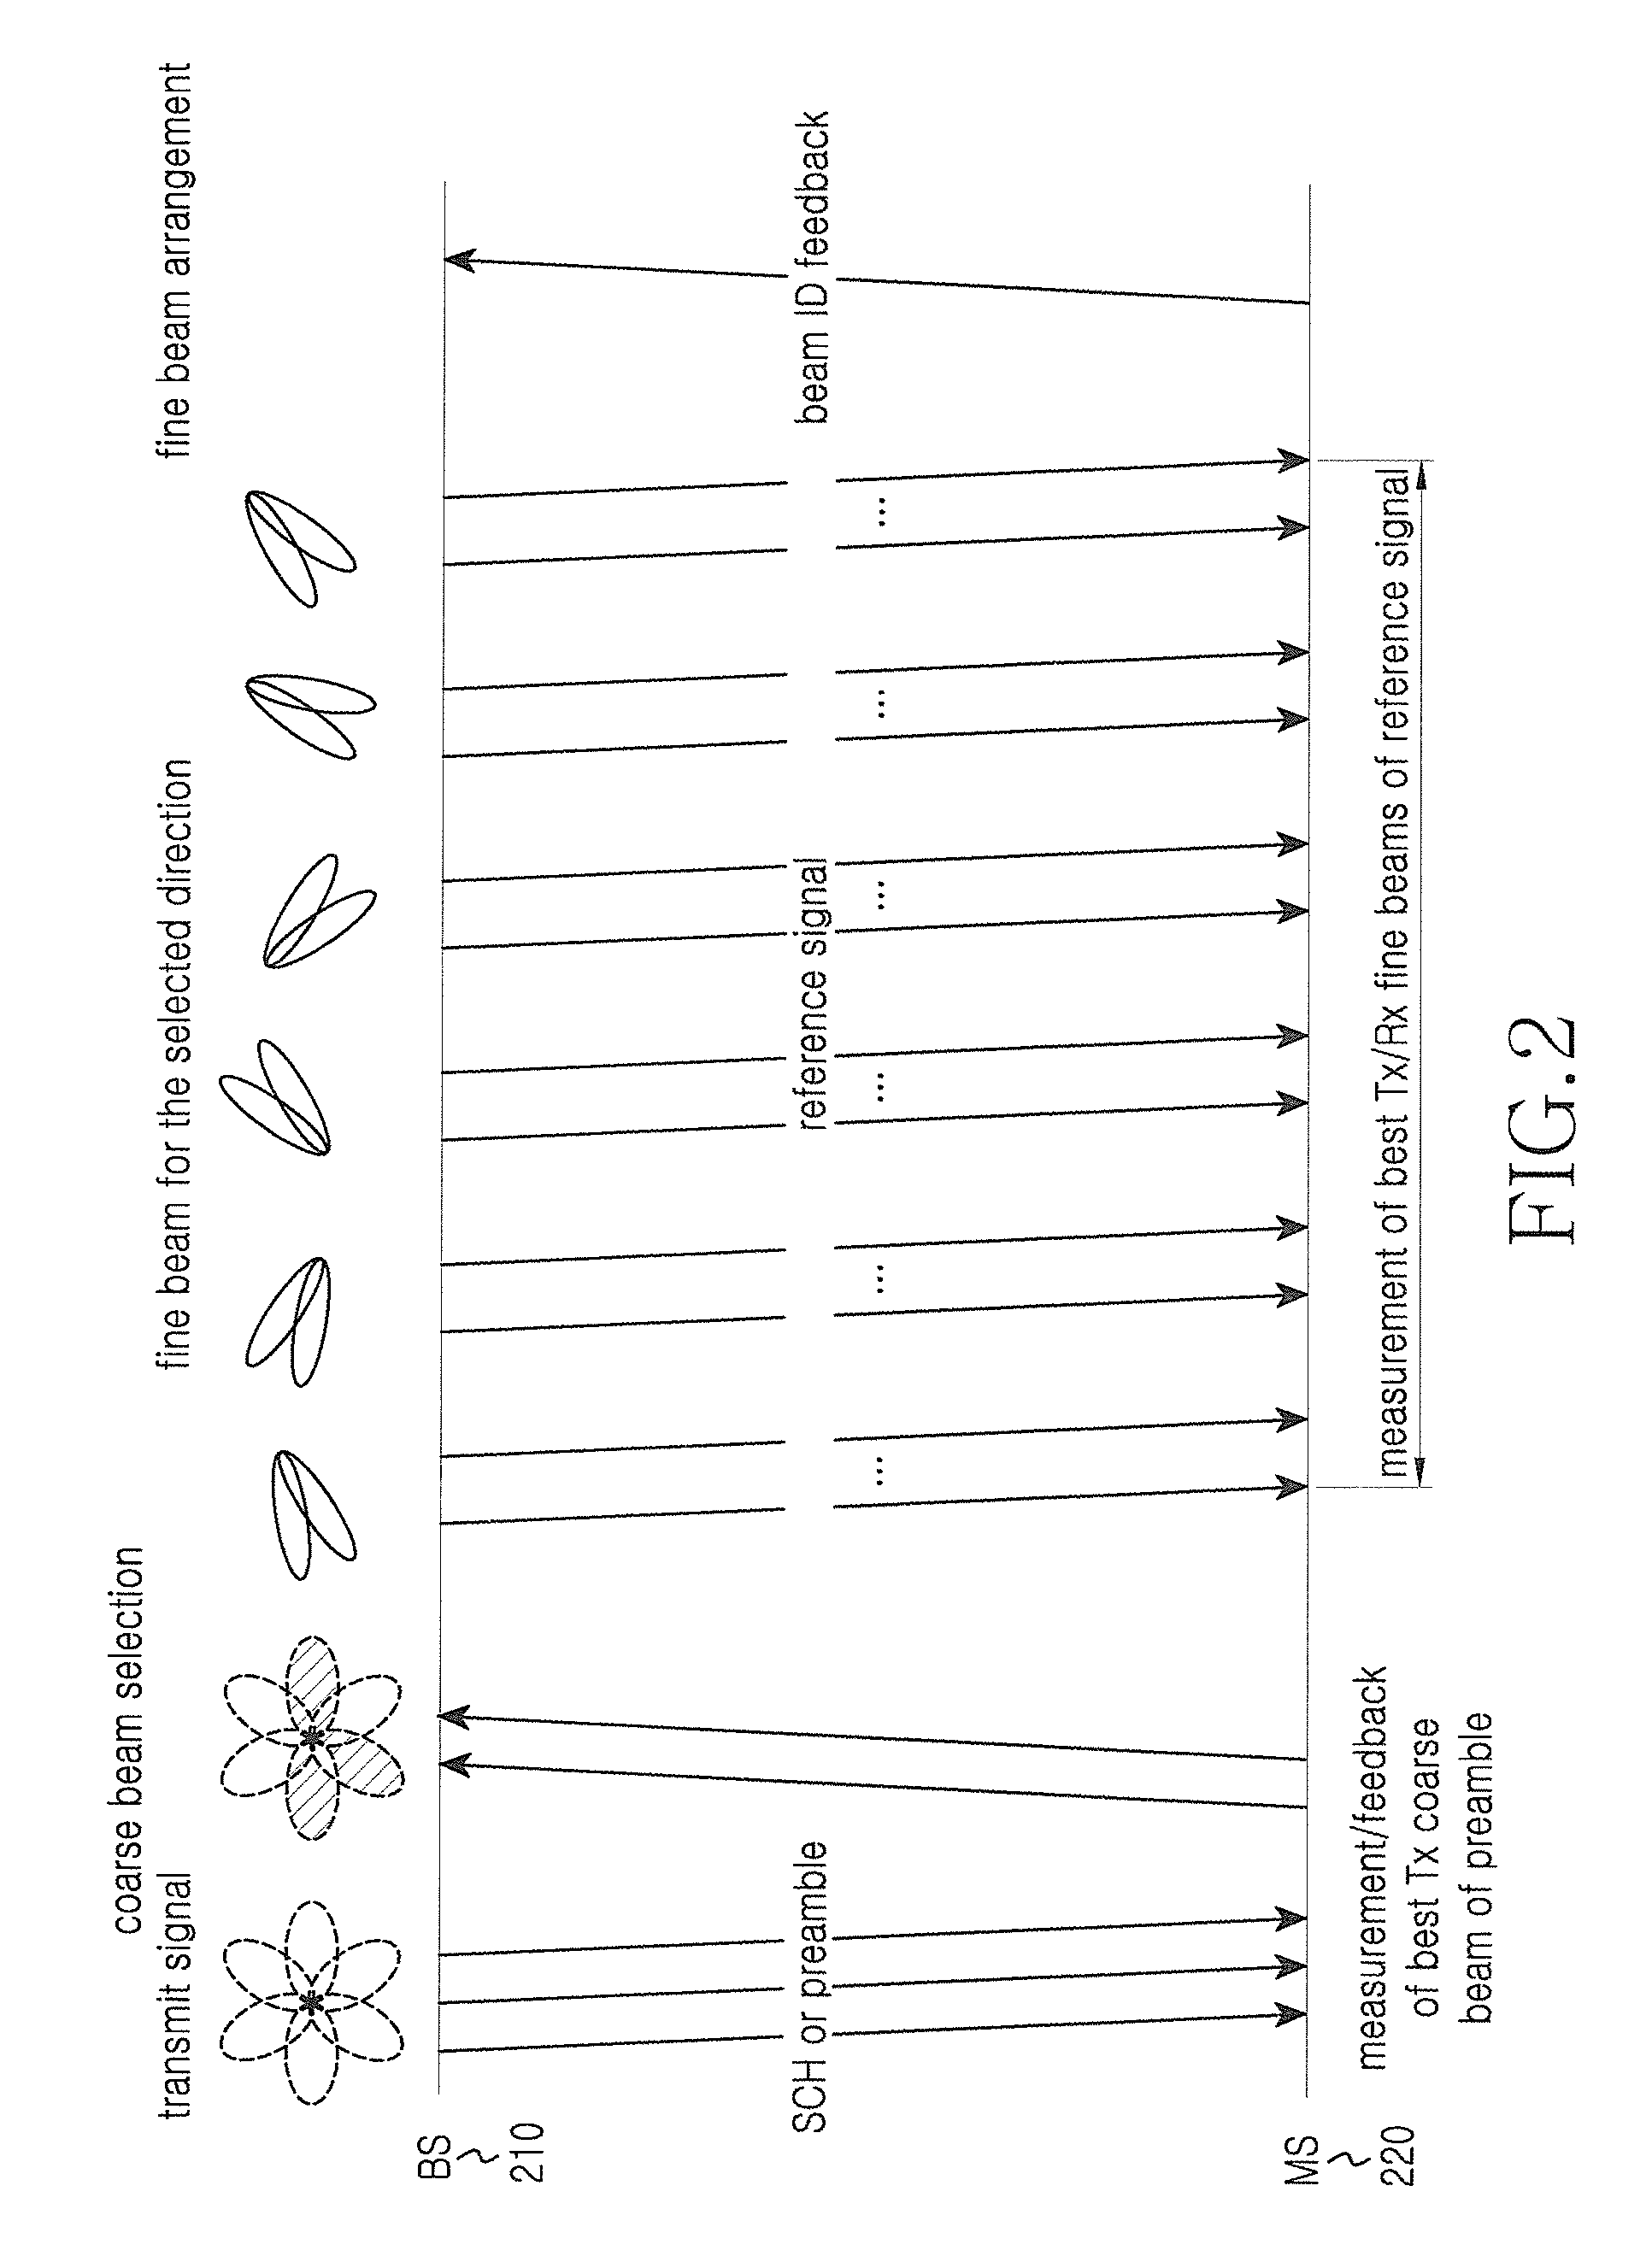 Method and apparatus for short handover latency in wireless communication system using beam forming